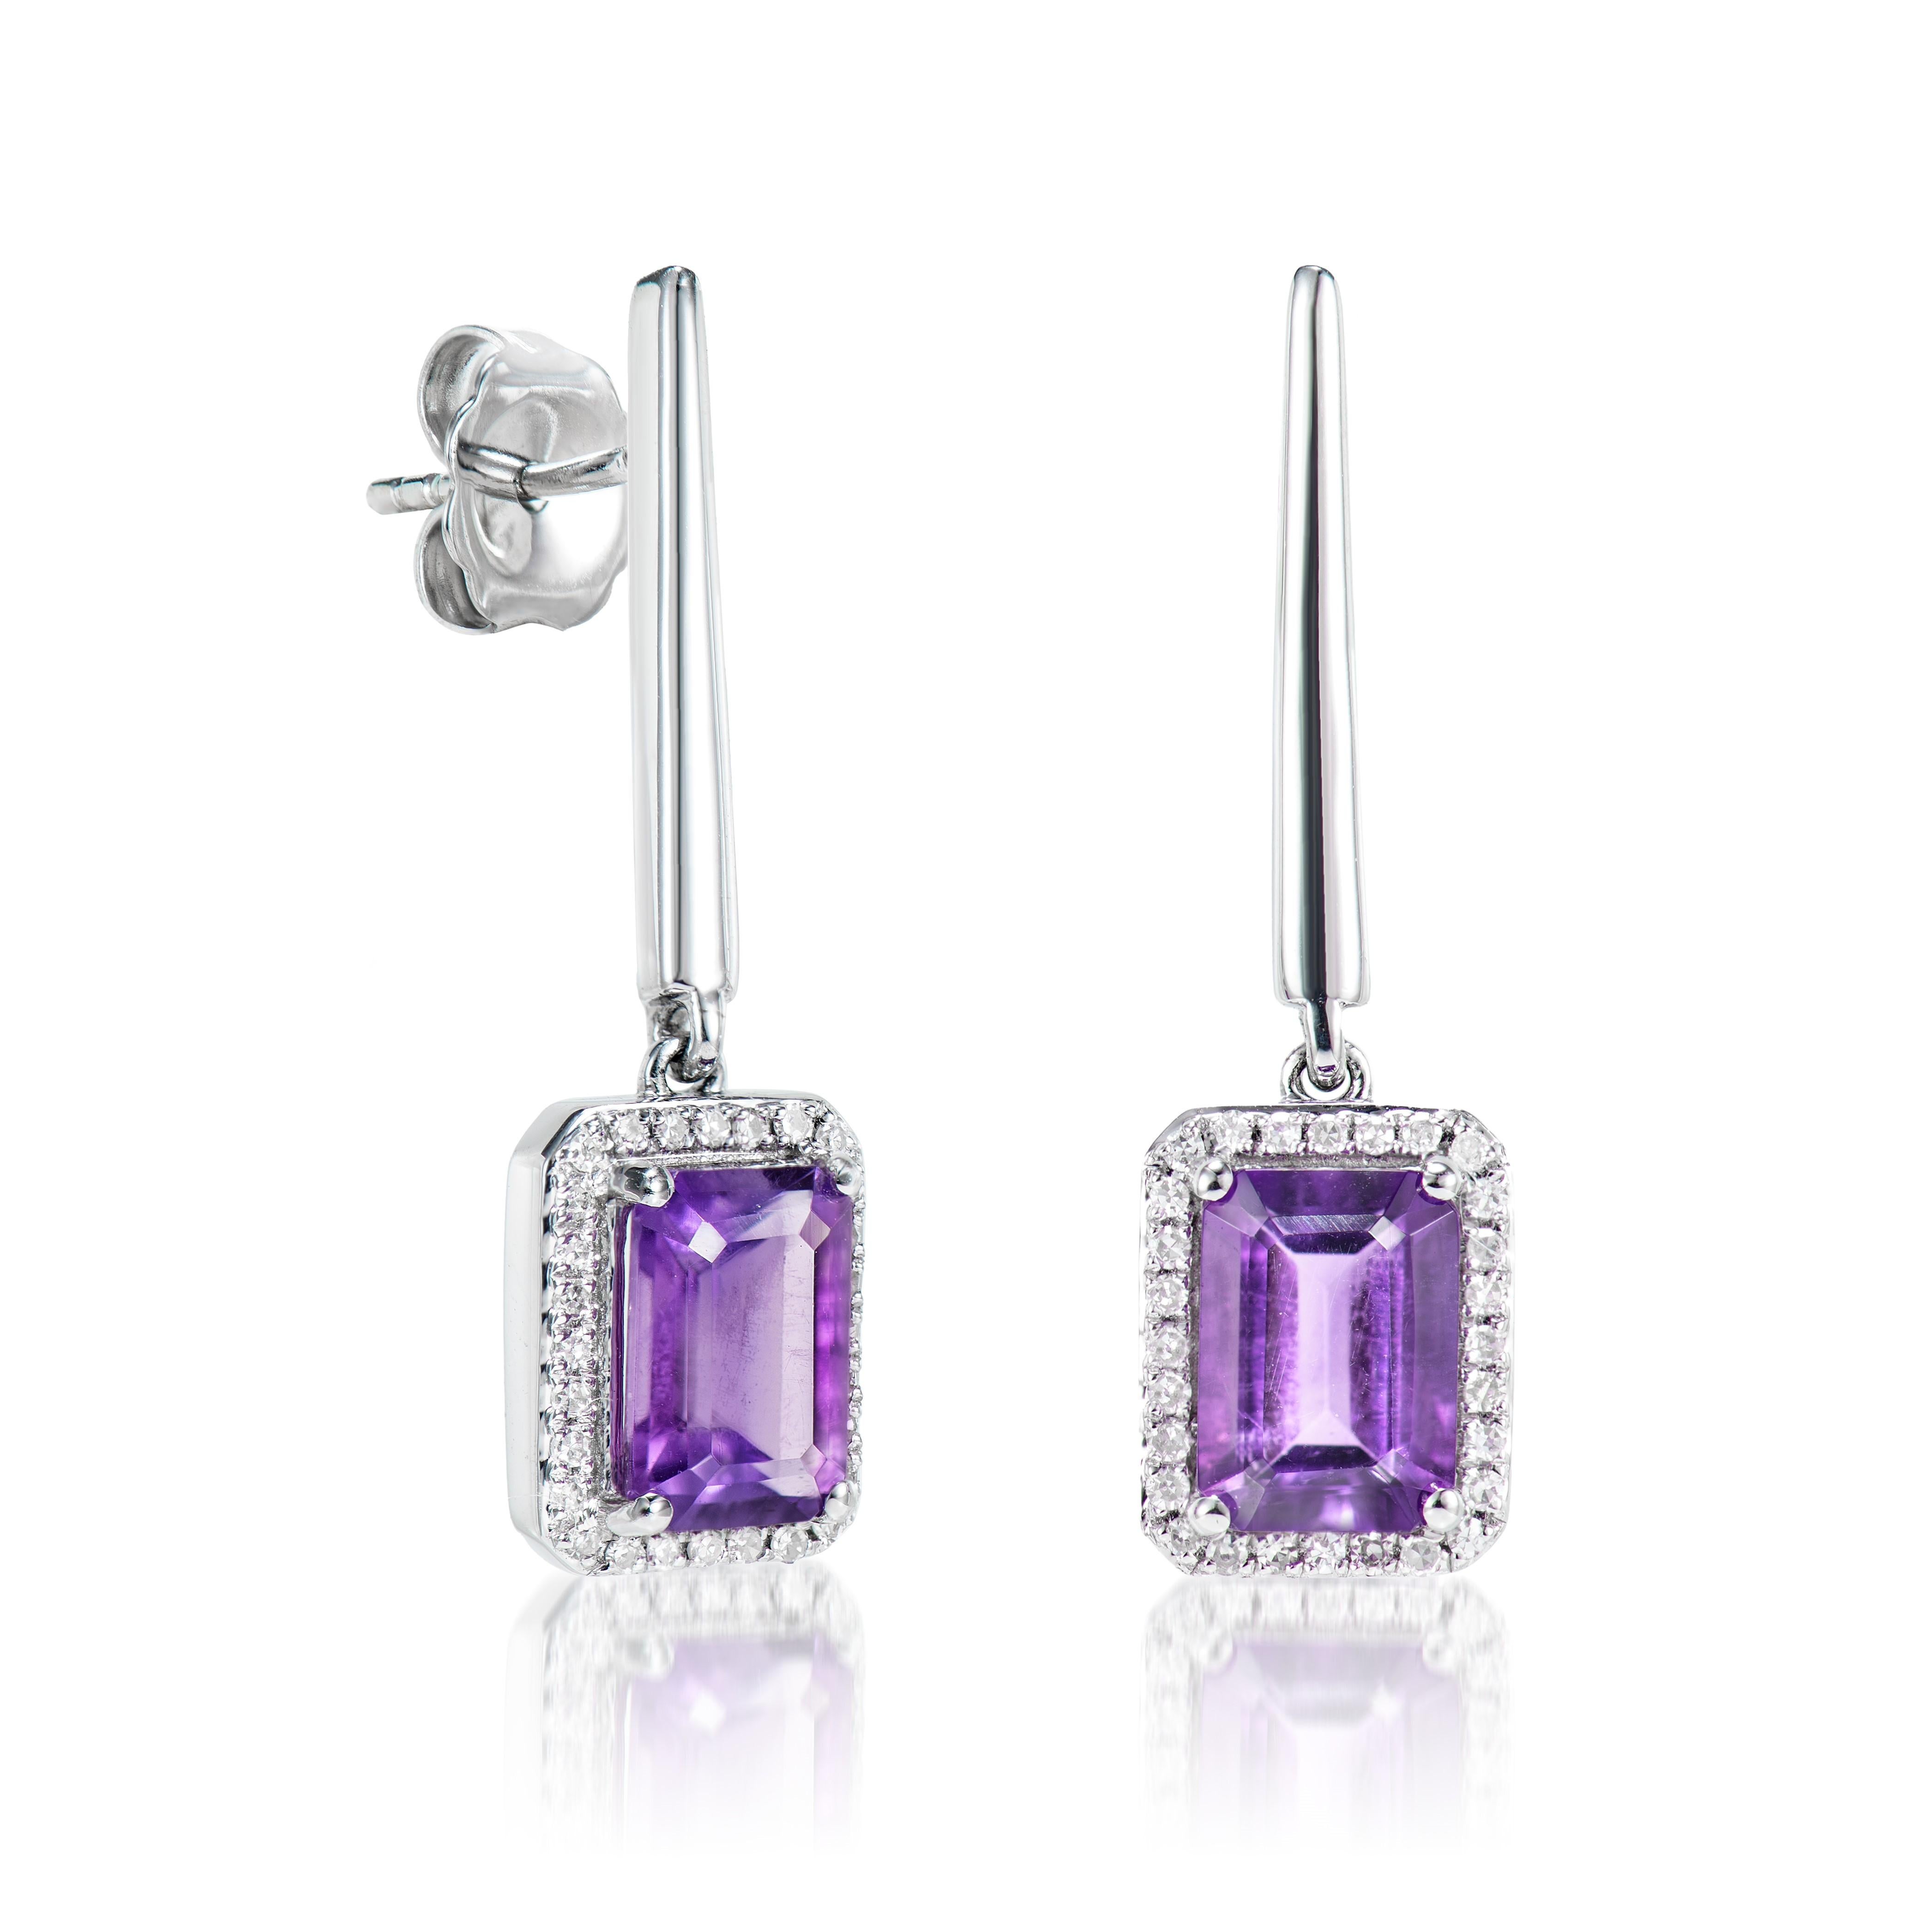 Presented A lovely set of Amethyst for people who value quality and want to wear it to any occasion or celebration. The White gold Amethyst Drop Earrings adorned with diamonds offer a classic yet elegant appearance.

Amethyst Drop Earrings in